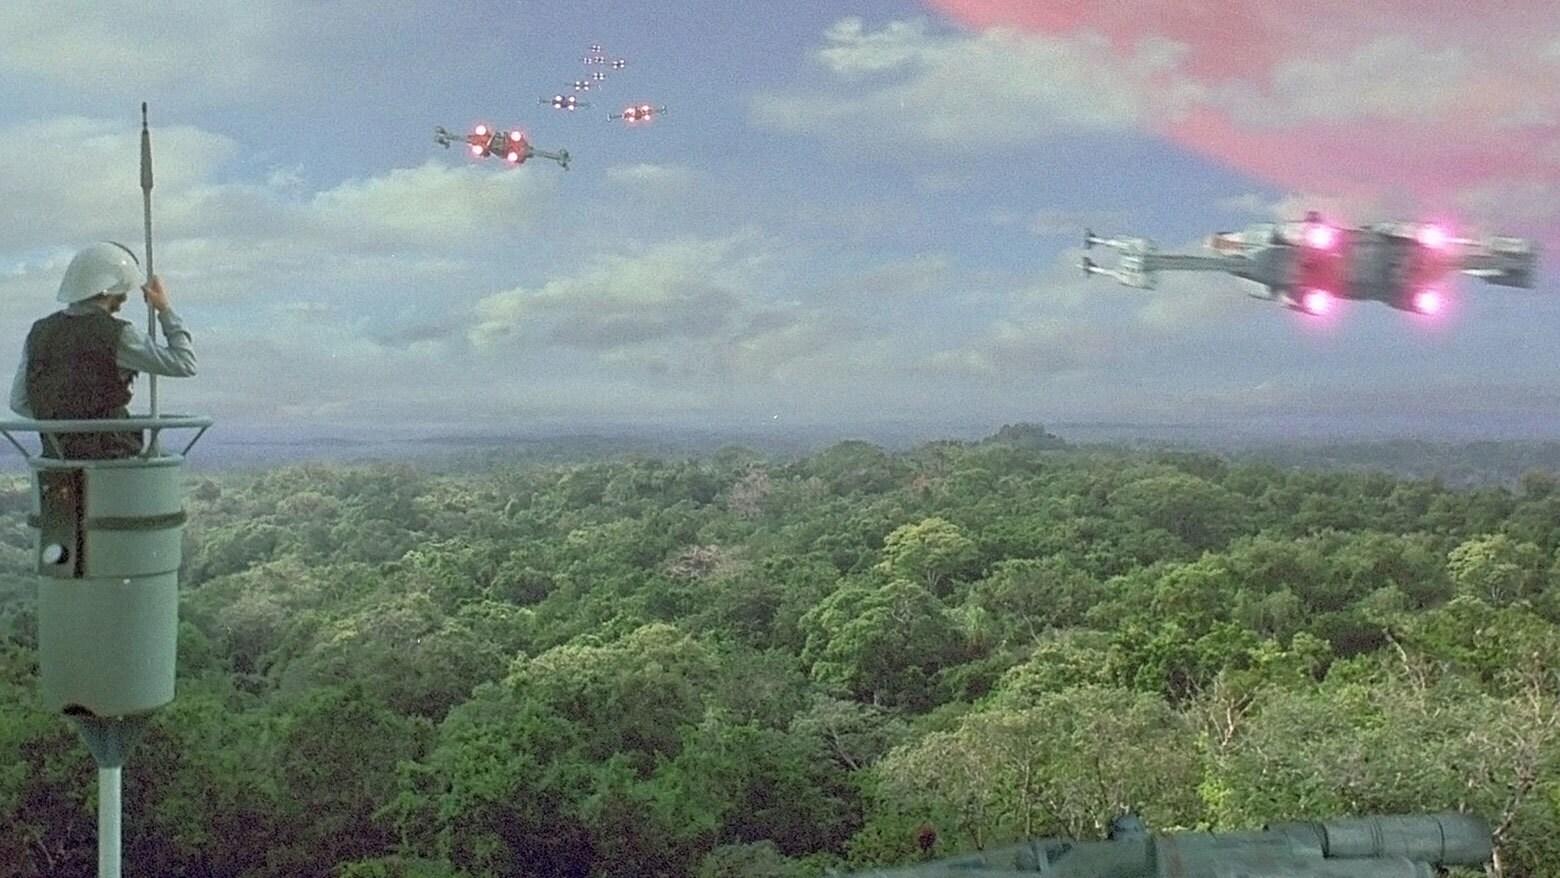 A Rebel guard watches X-Wing Starfighters take off on Yavin 4 in Star Wars A New Hope.